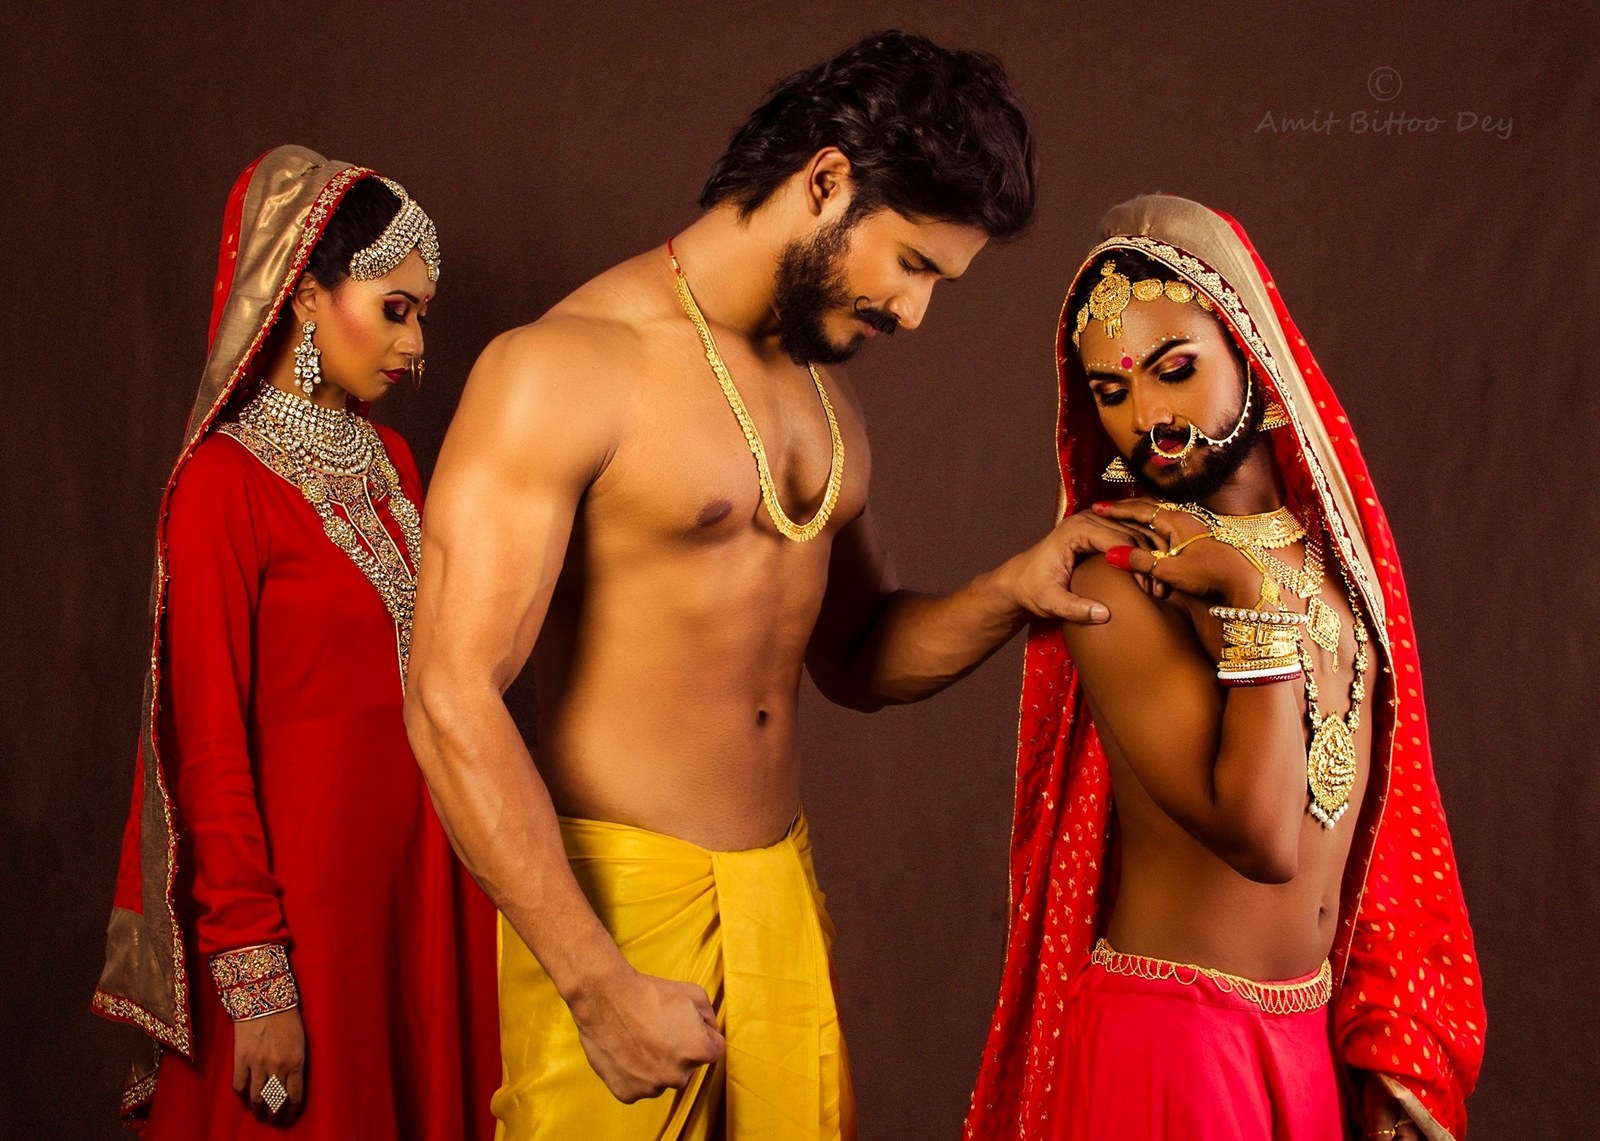 Indian threesome's